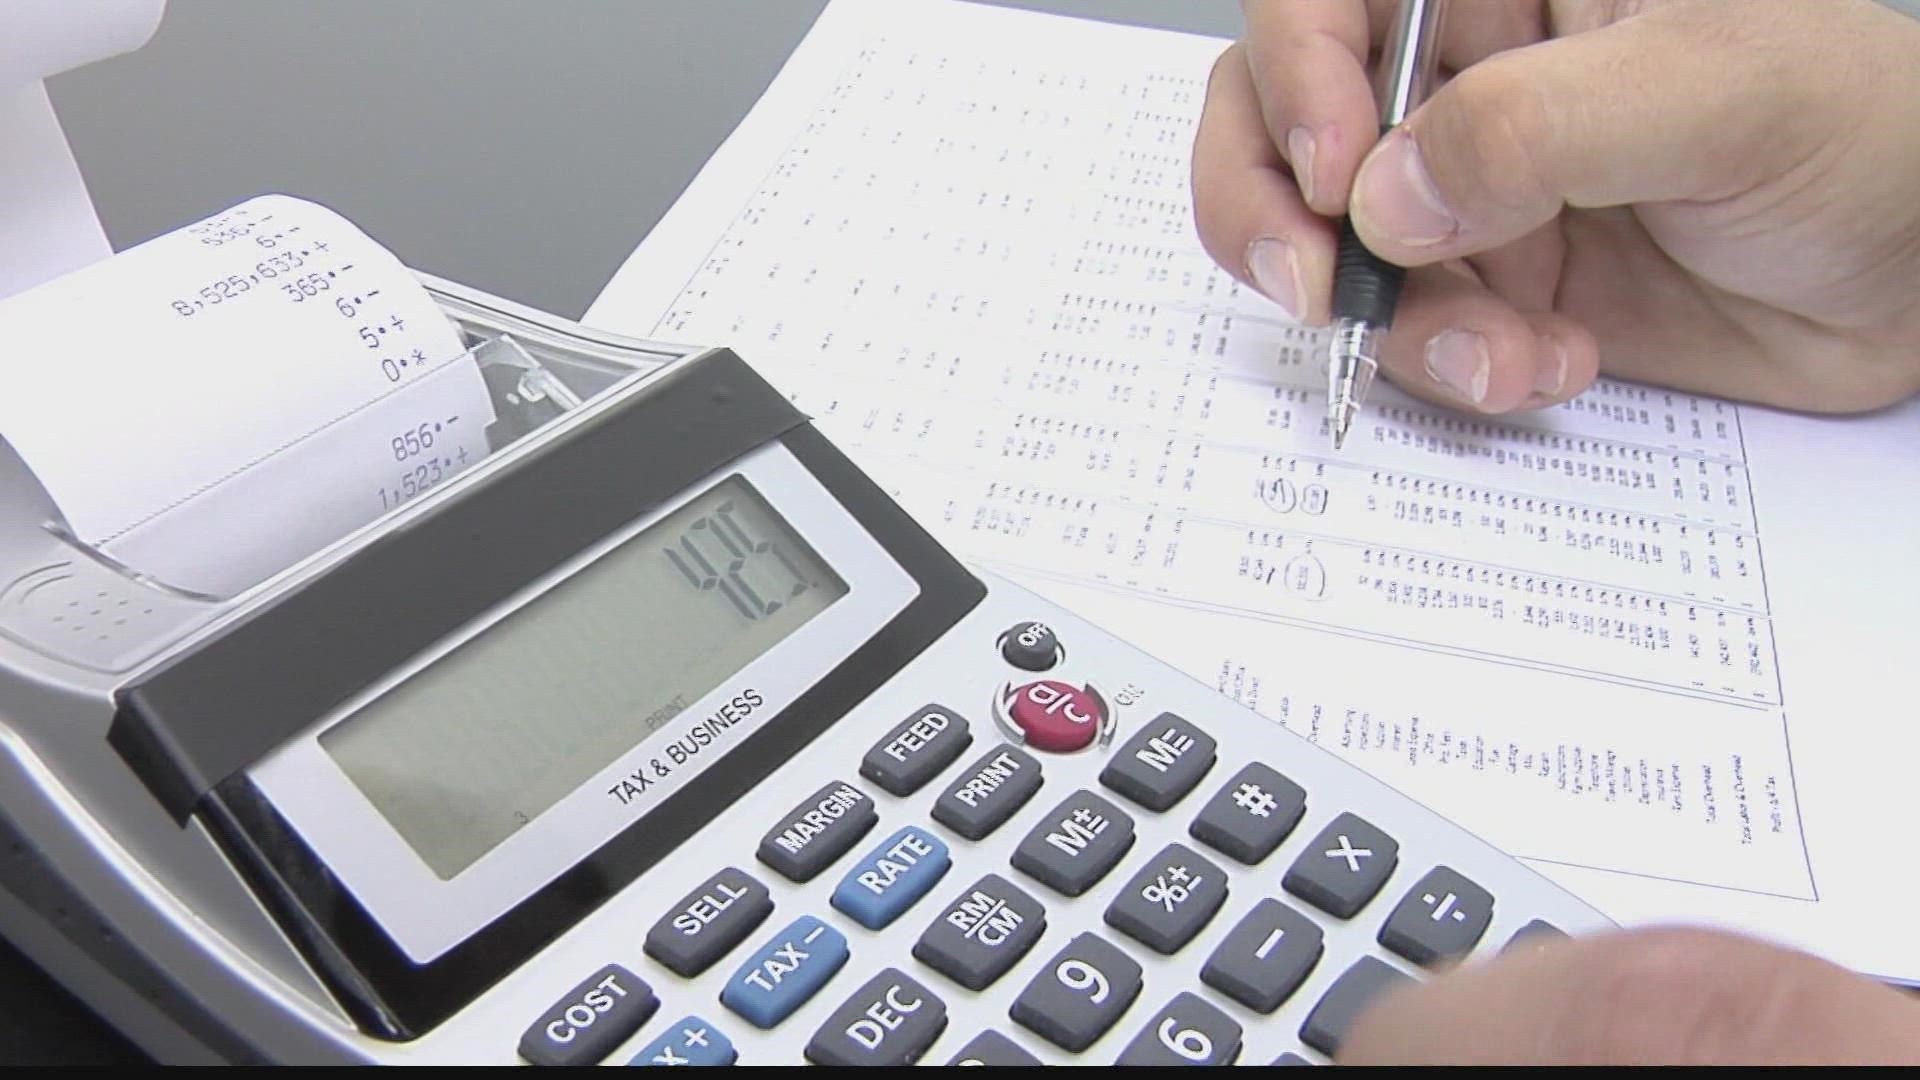 Seniors who want help filing their taxes may be able to get that help at the Huntsville-Madison County Senior Center.